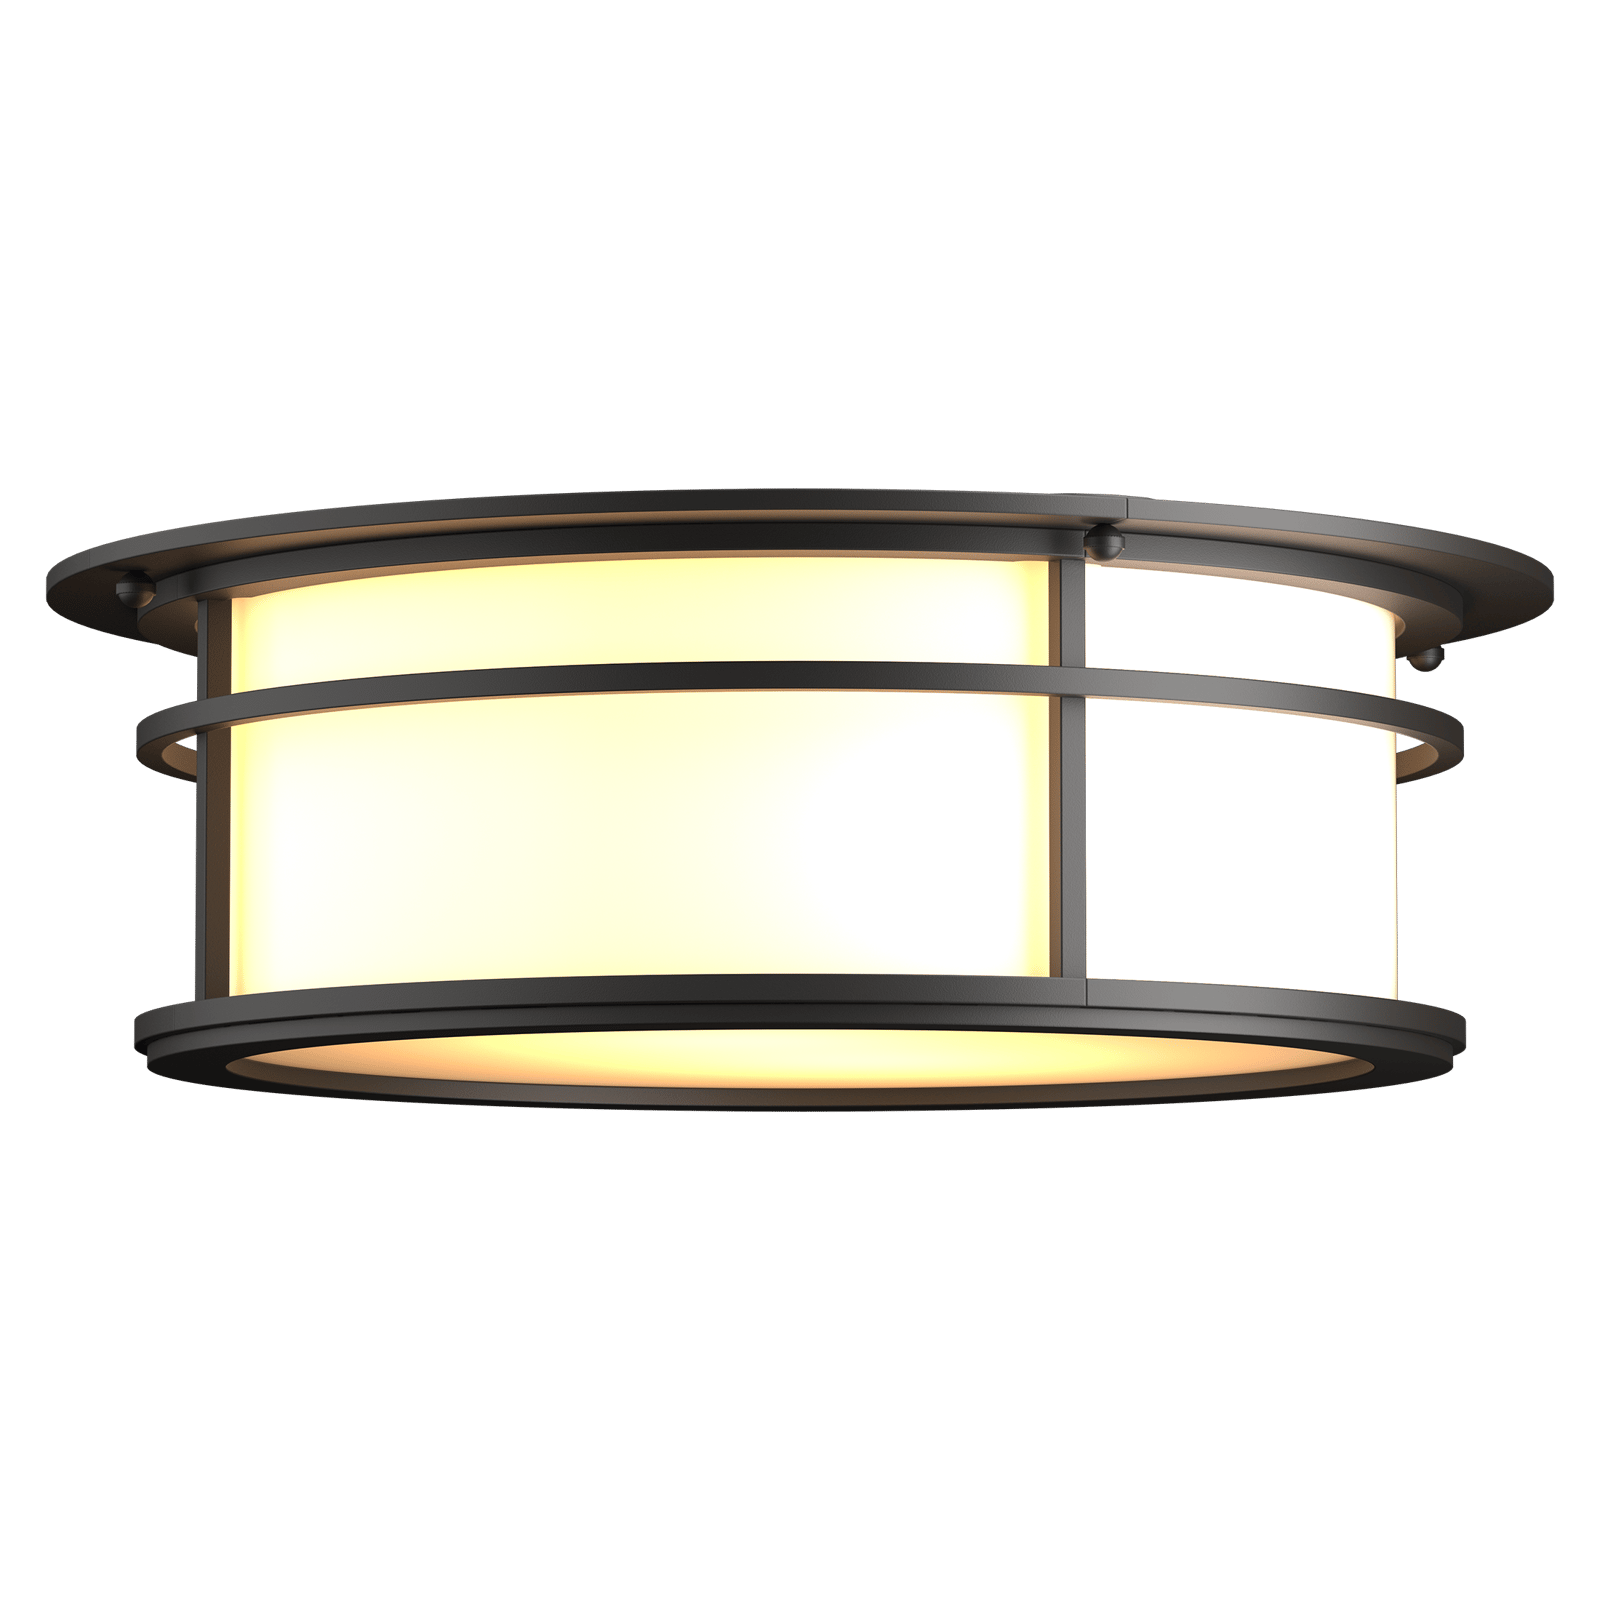 Hubbardton Forge Province Outdoor Flush Mount Outdoor l Wall Hubbardton Forge Coastal Oil Rubbed Bronze Opal Glass (GG) 